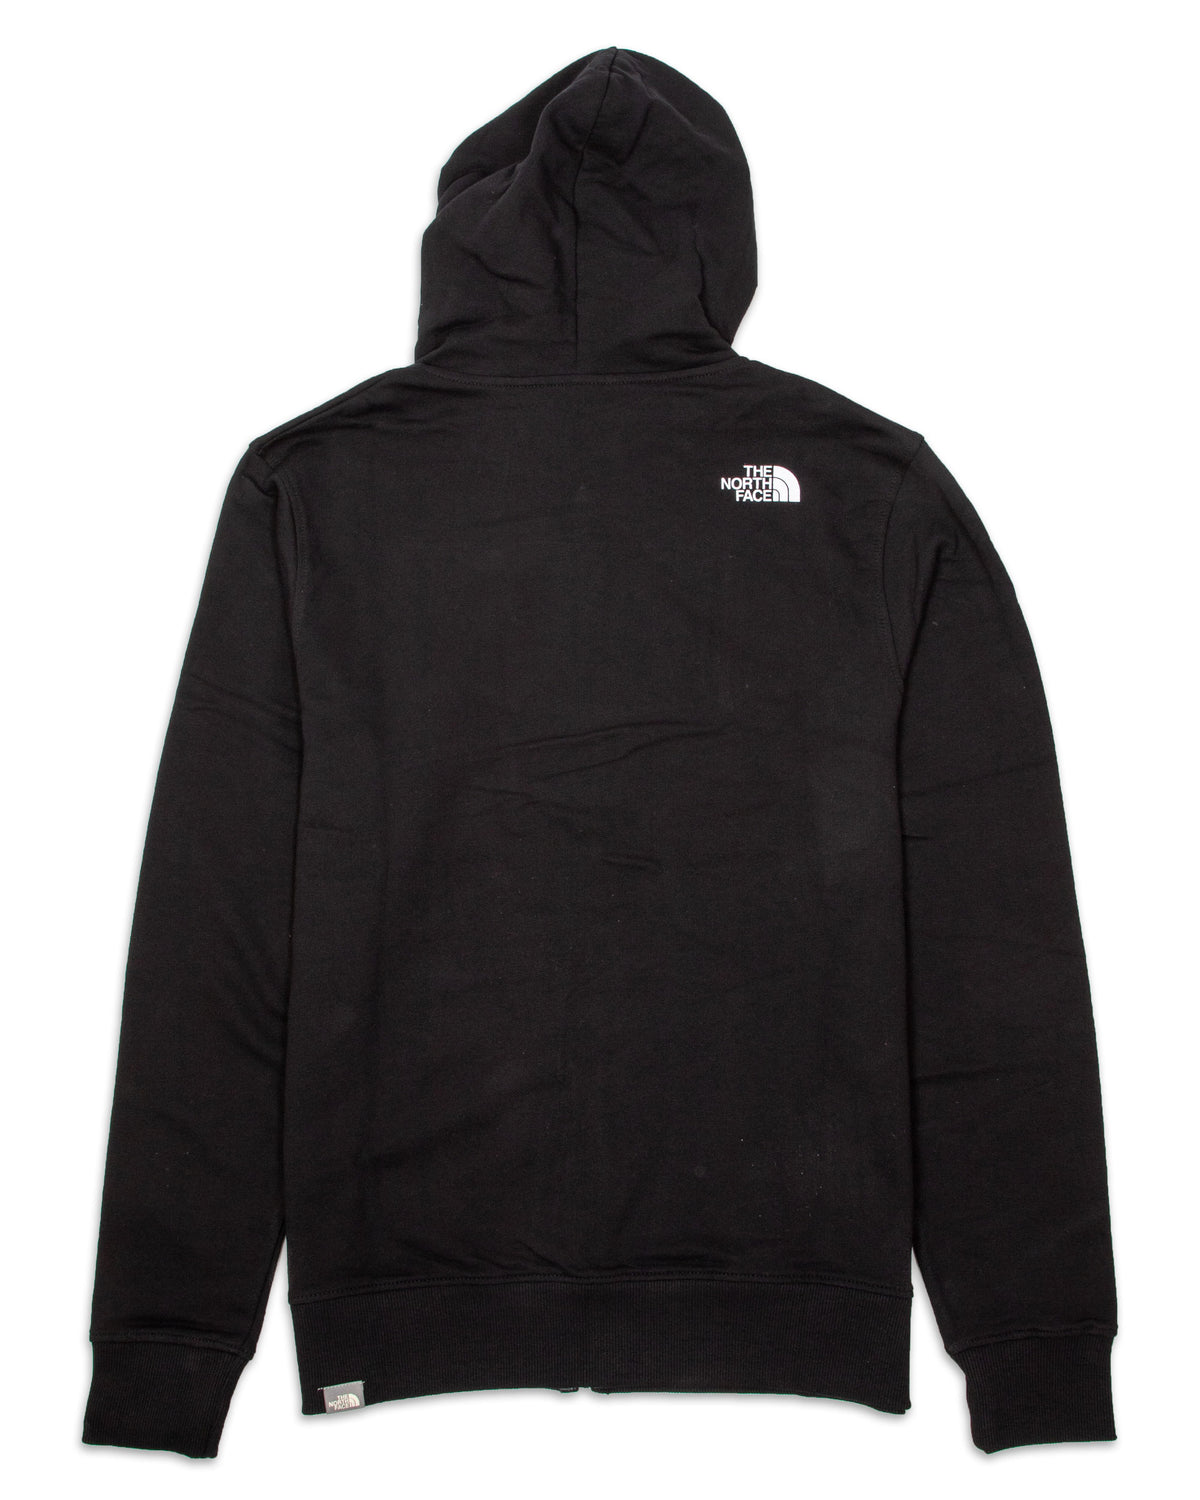 Man Hoodie The North face Open Gate Black